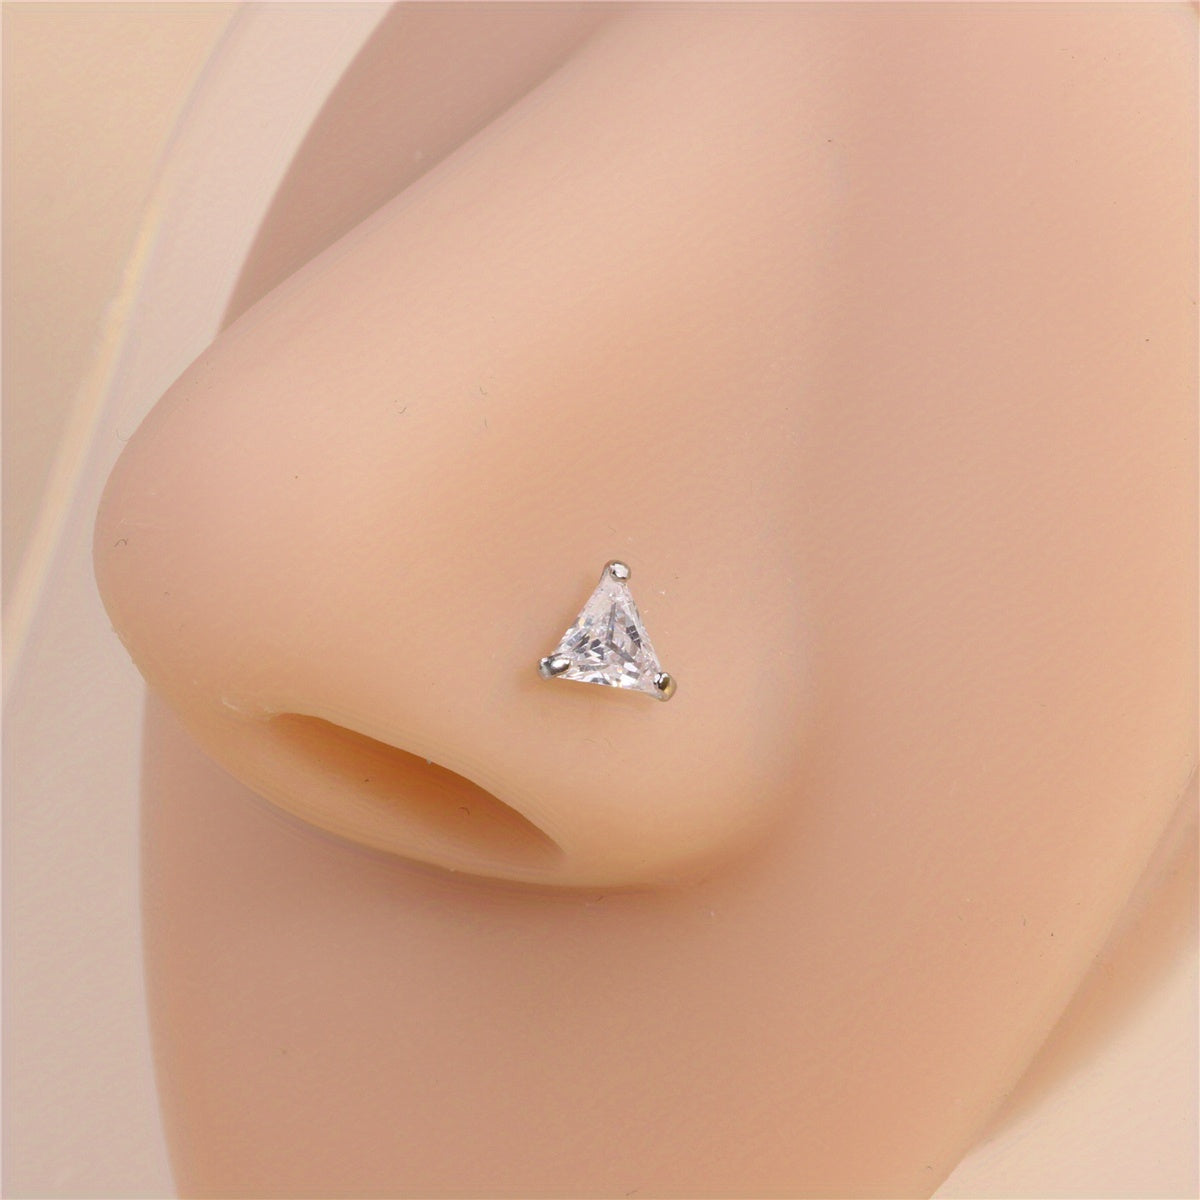 1PC Triangle Shape Nose Ring Cubic Zirconia L Shape Women's Nose Ring Stud Body Piercing Jewelry